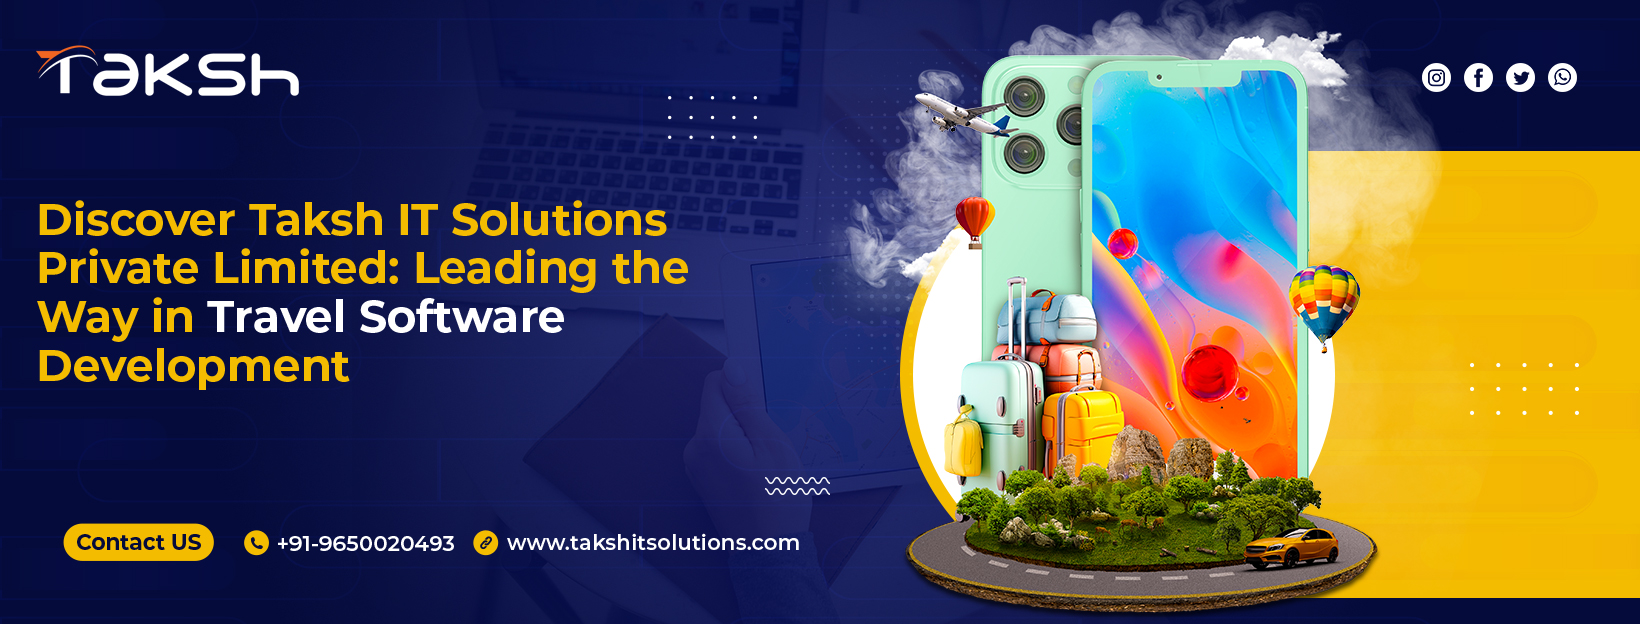 Discover Taksh IT Solutions Private Limited: Leading the Way in Travel Software Development